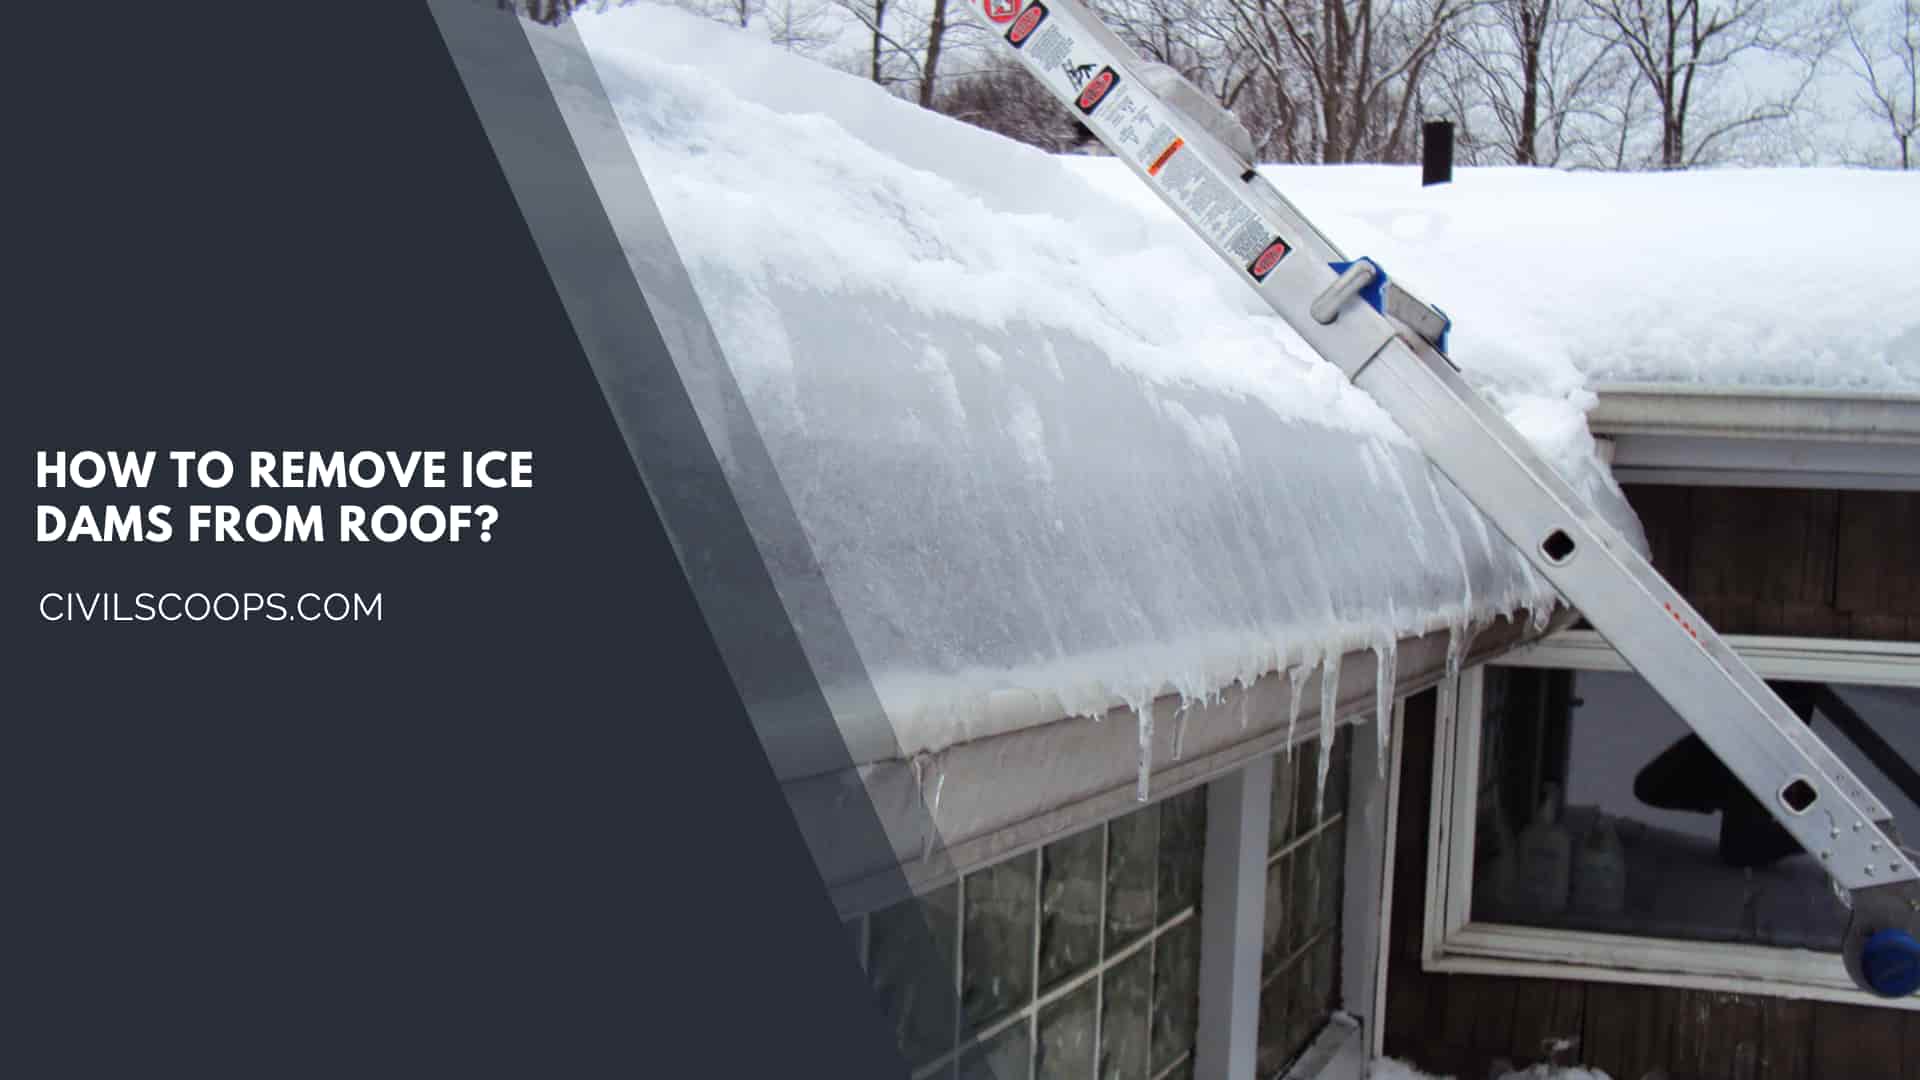 How to Remove Ice Dams from Roof?